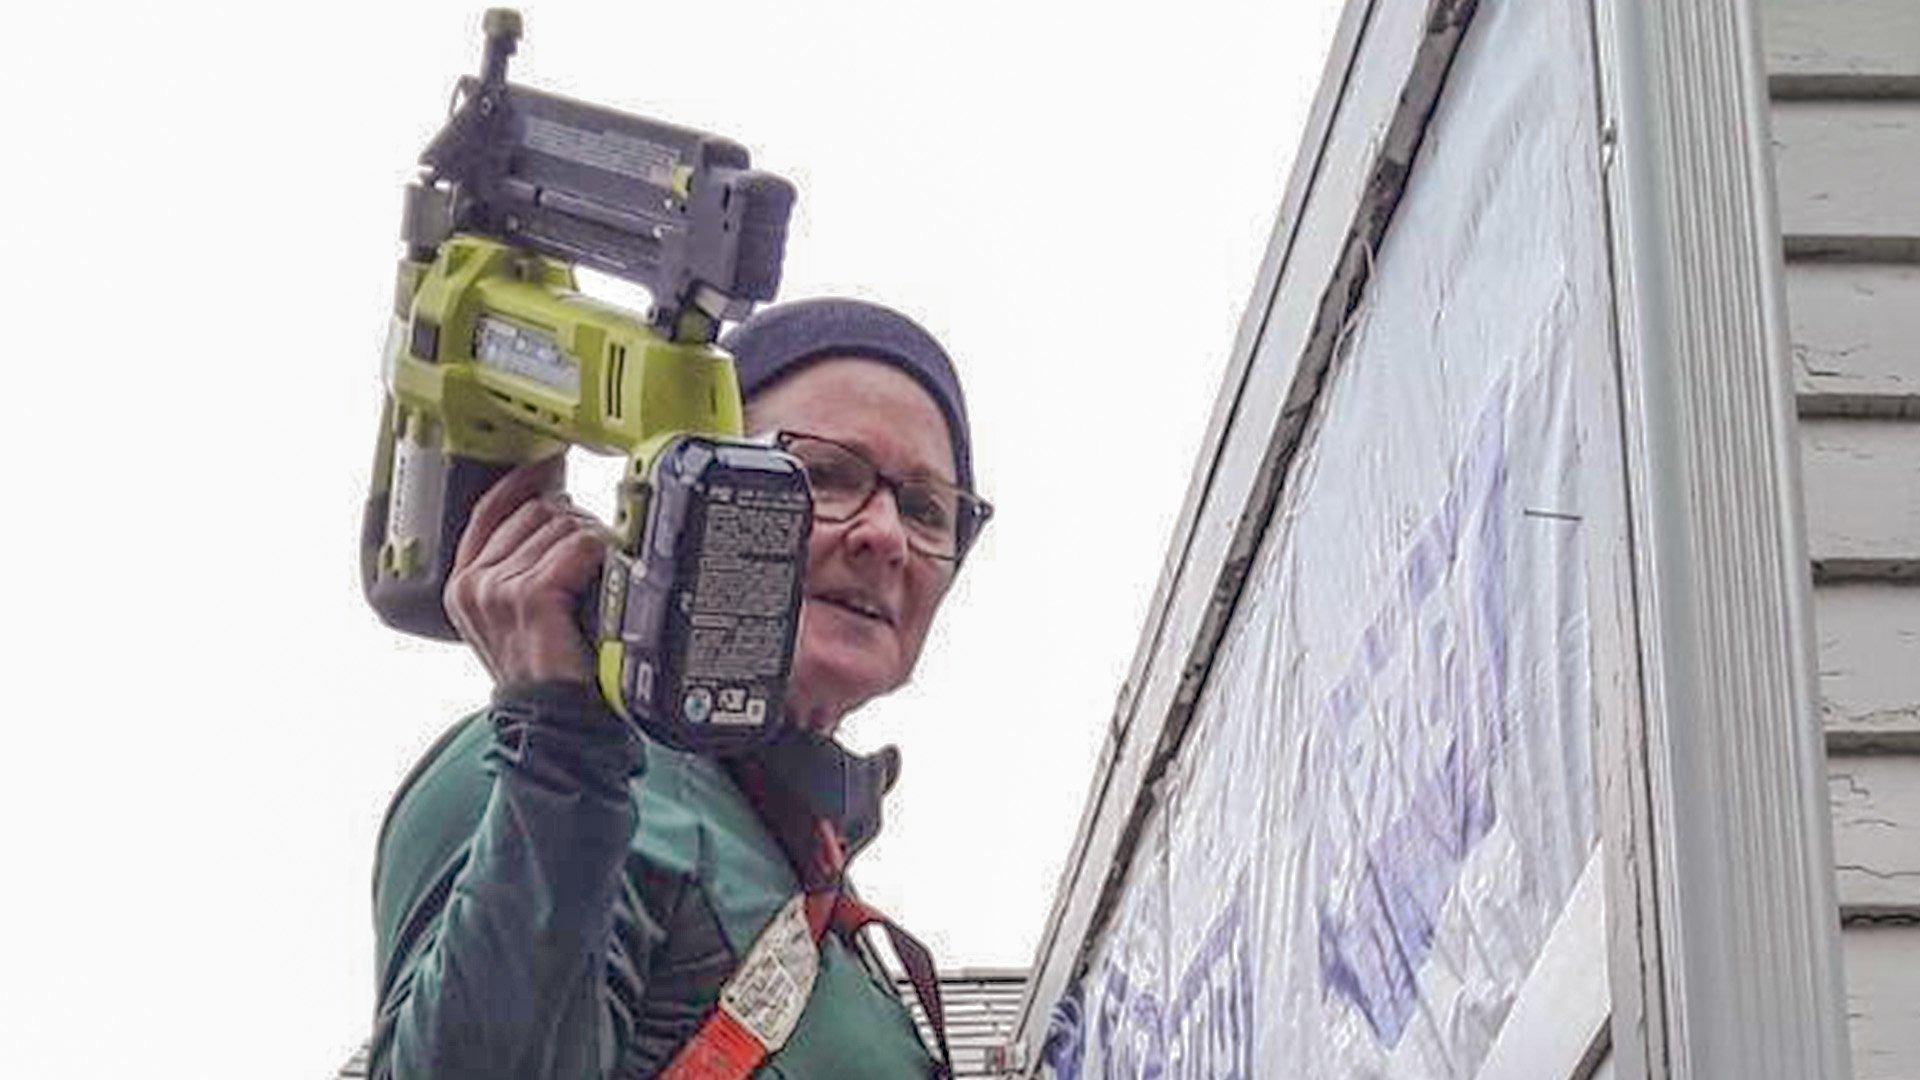 Karen L wears fall protection gear while standing on a residential roof. She holds a level and a nail gun to work on siding.